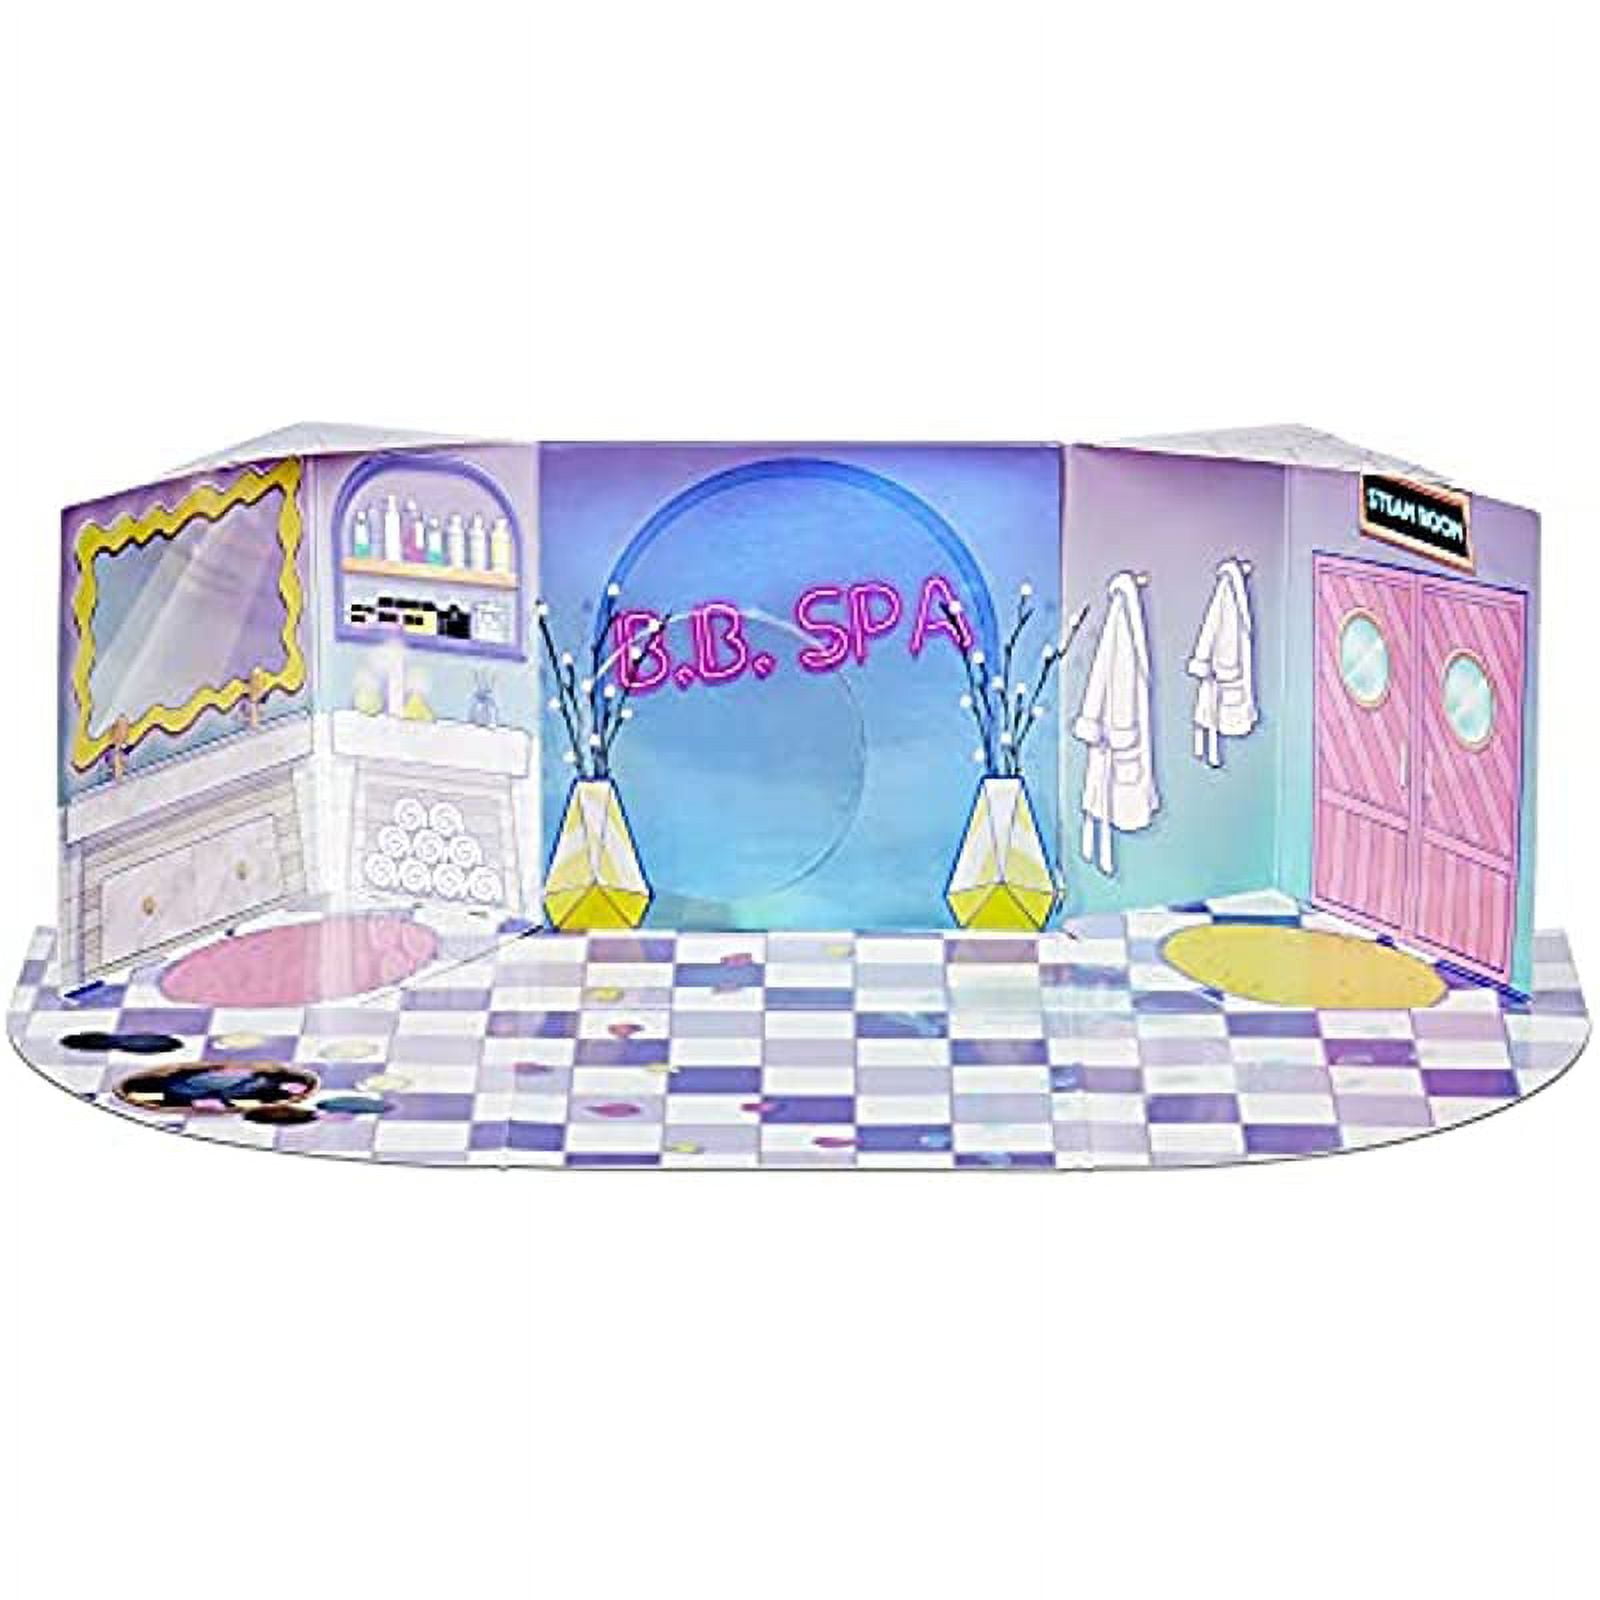 LOL Surprise! Squish Sand Magic House with Tot- Playset with Collectible  Doll, Squish Sand, Surprises, Accessories, Girls Gift Age 4+